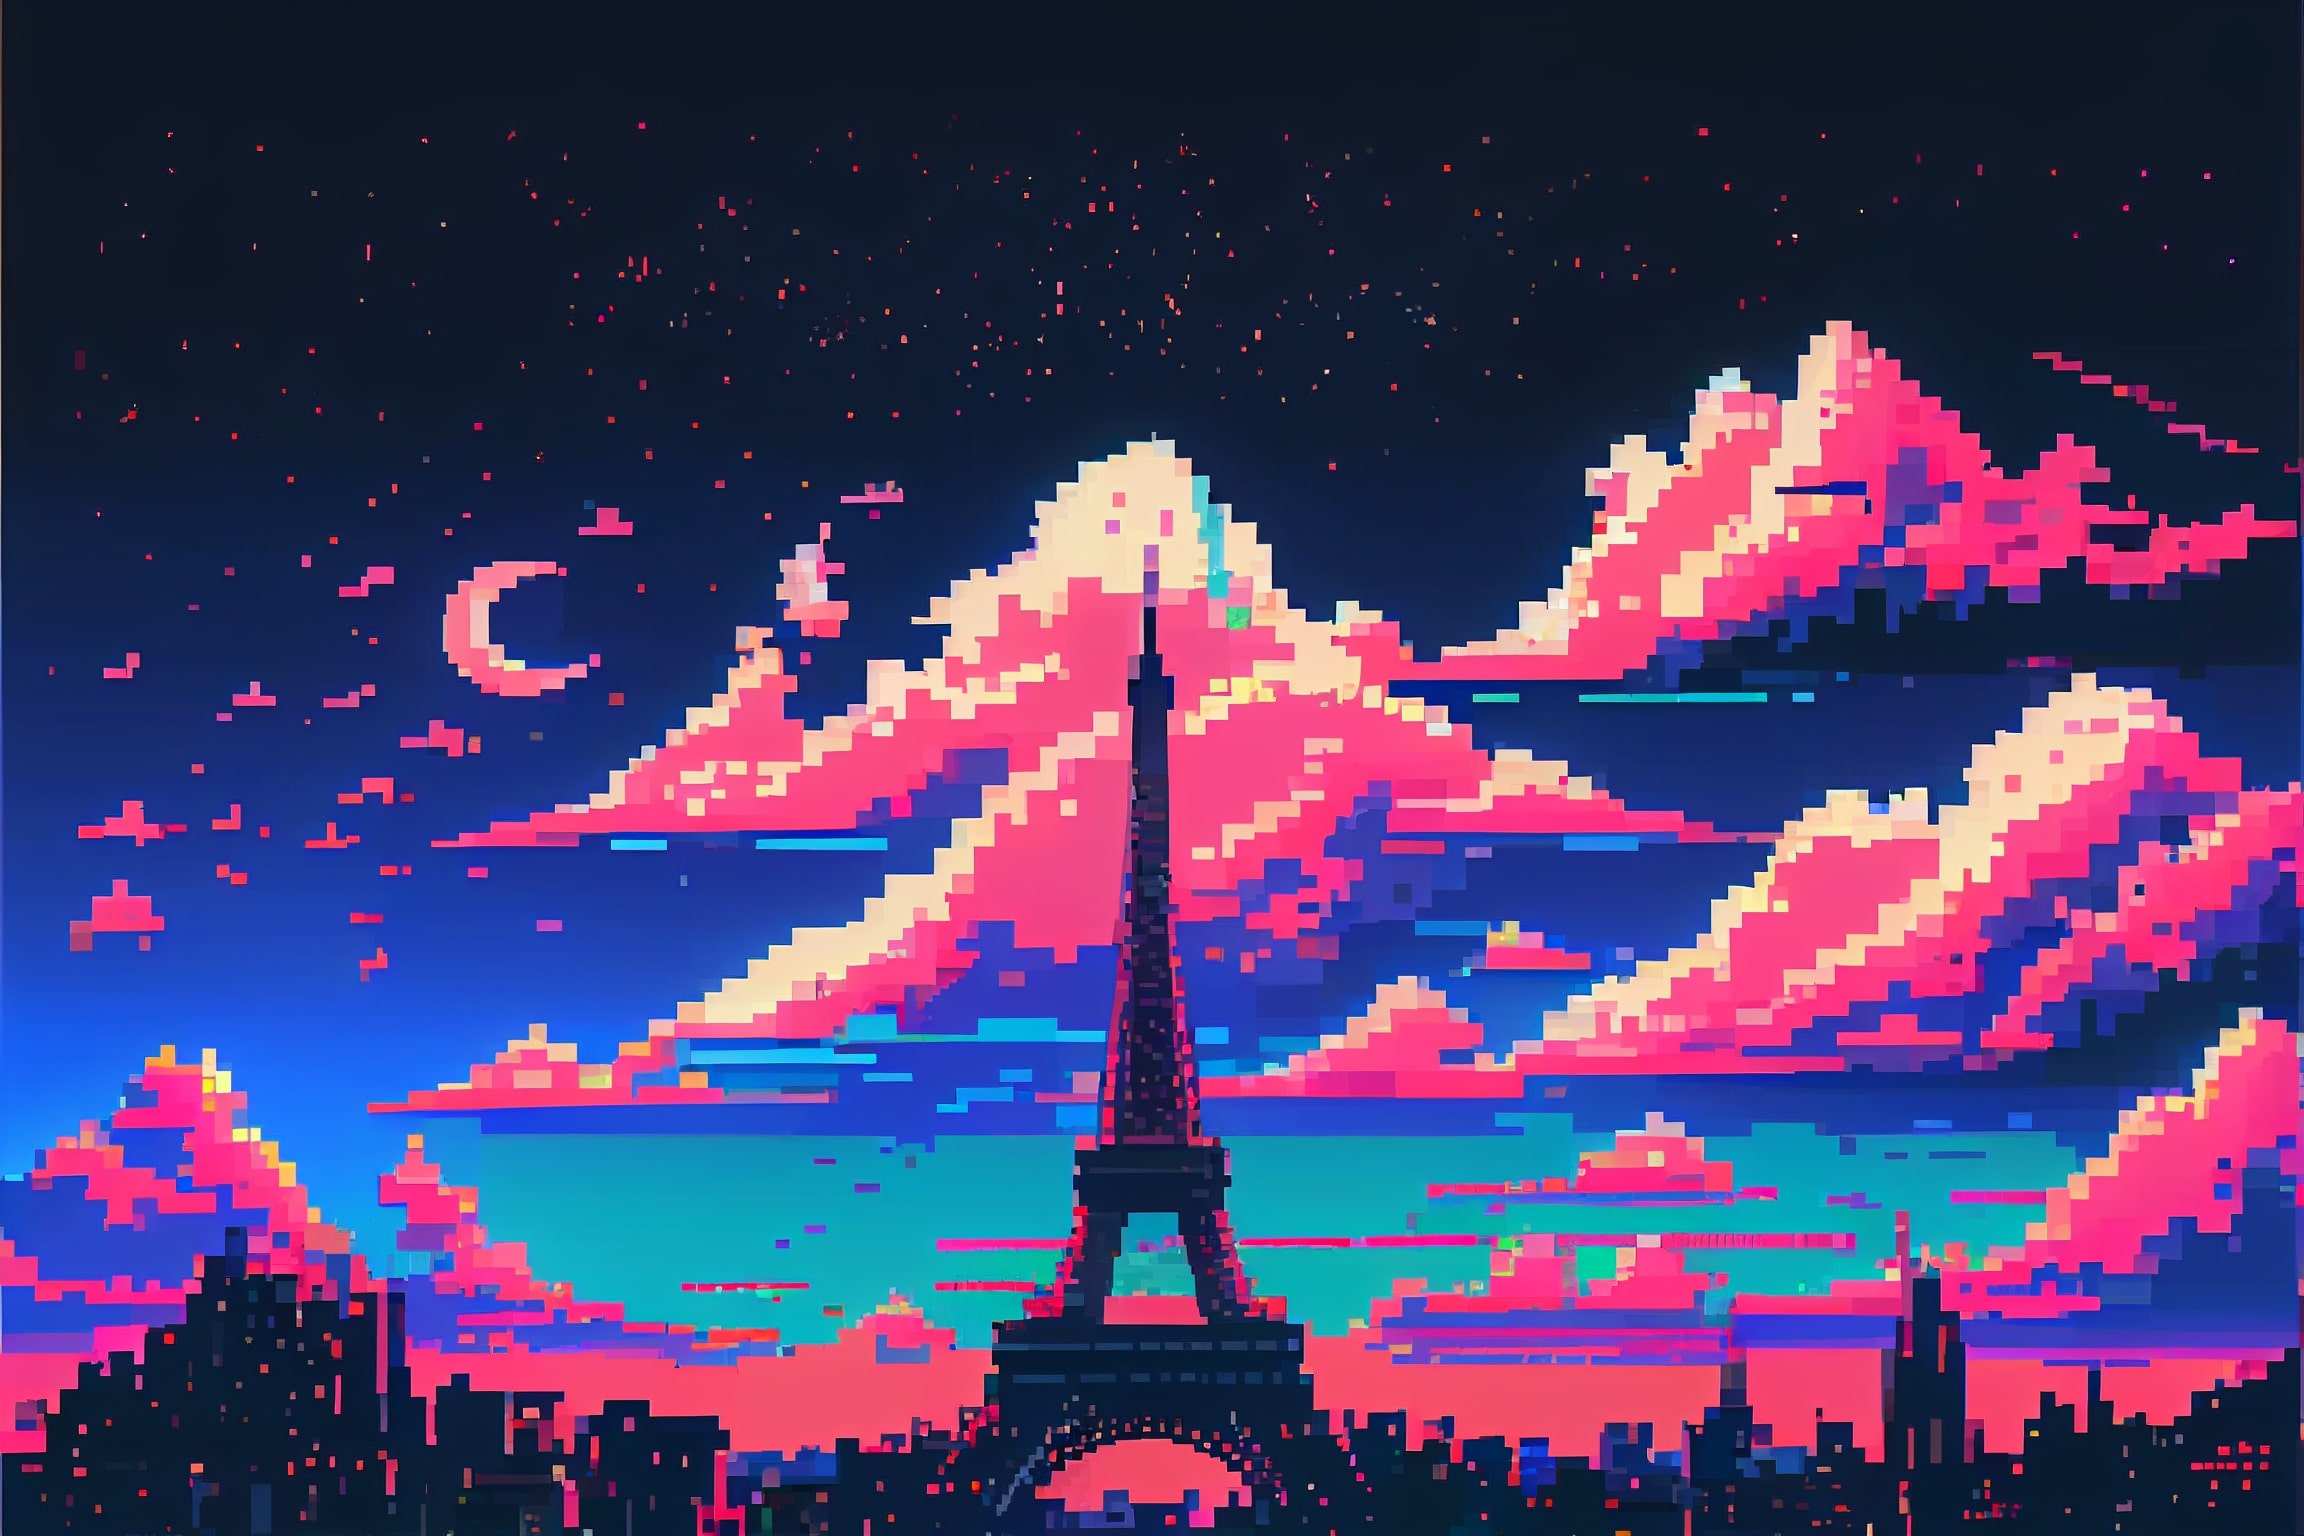 Pixel art picture of the eiffel tower.